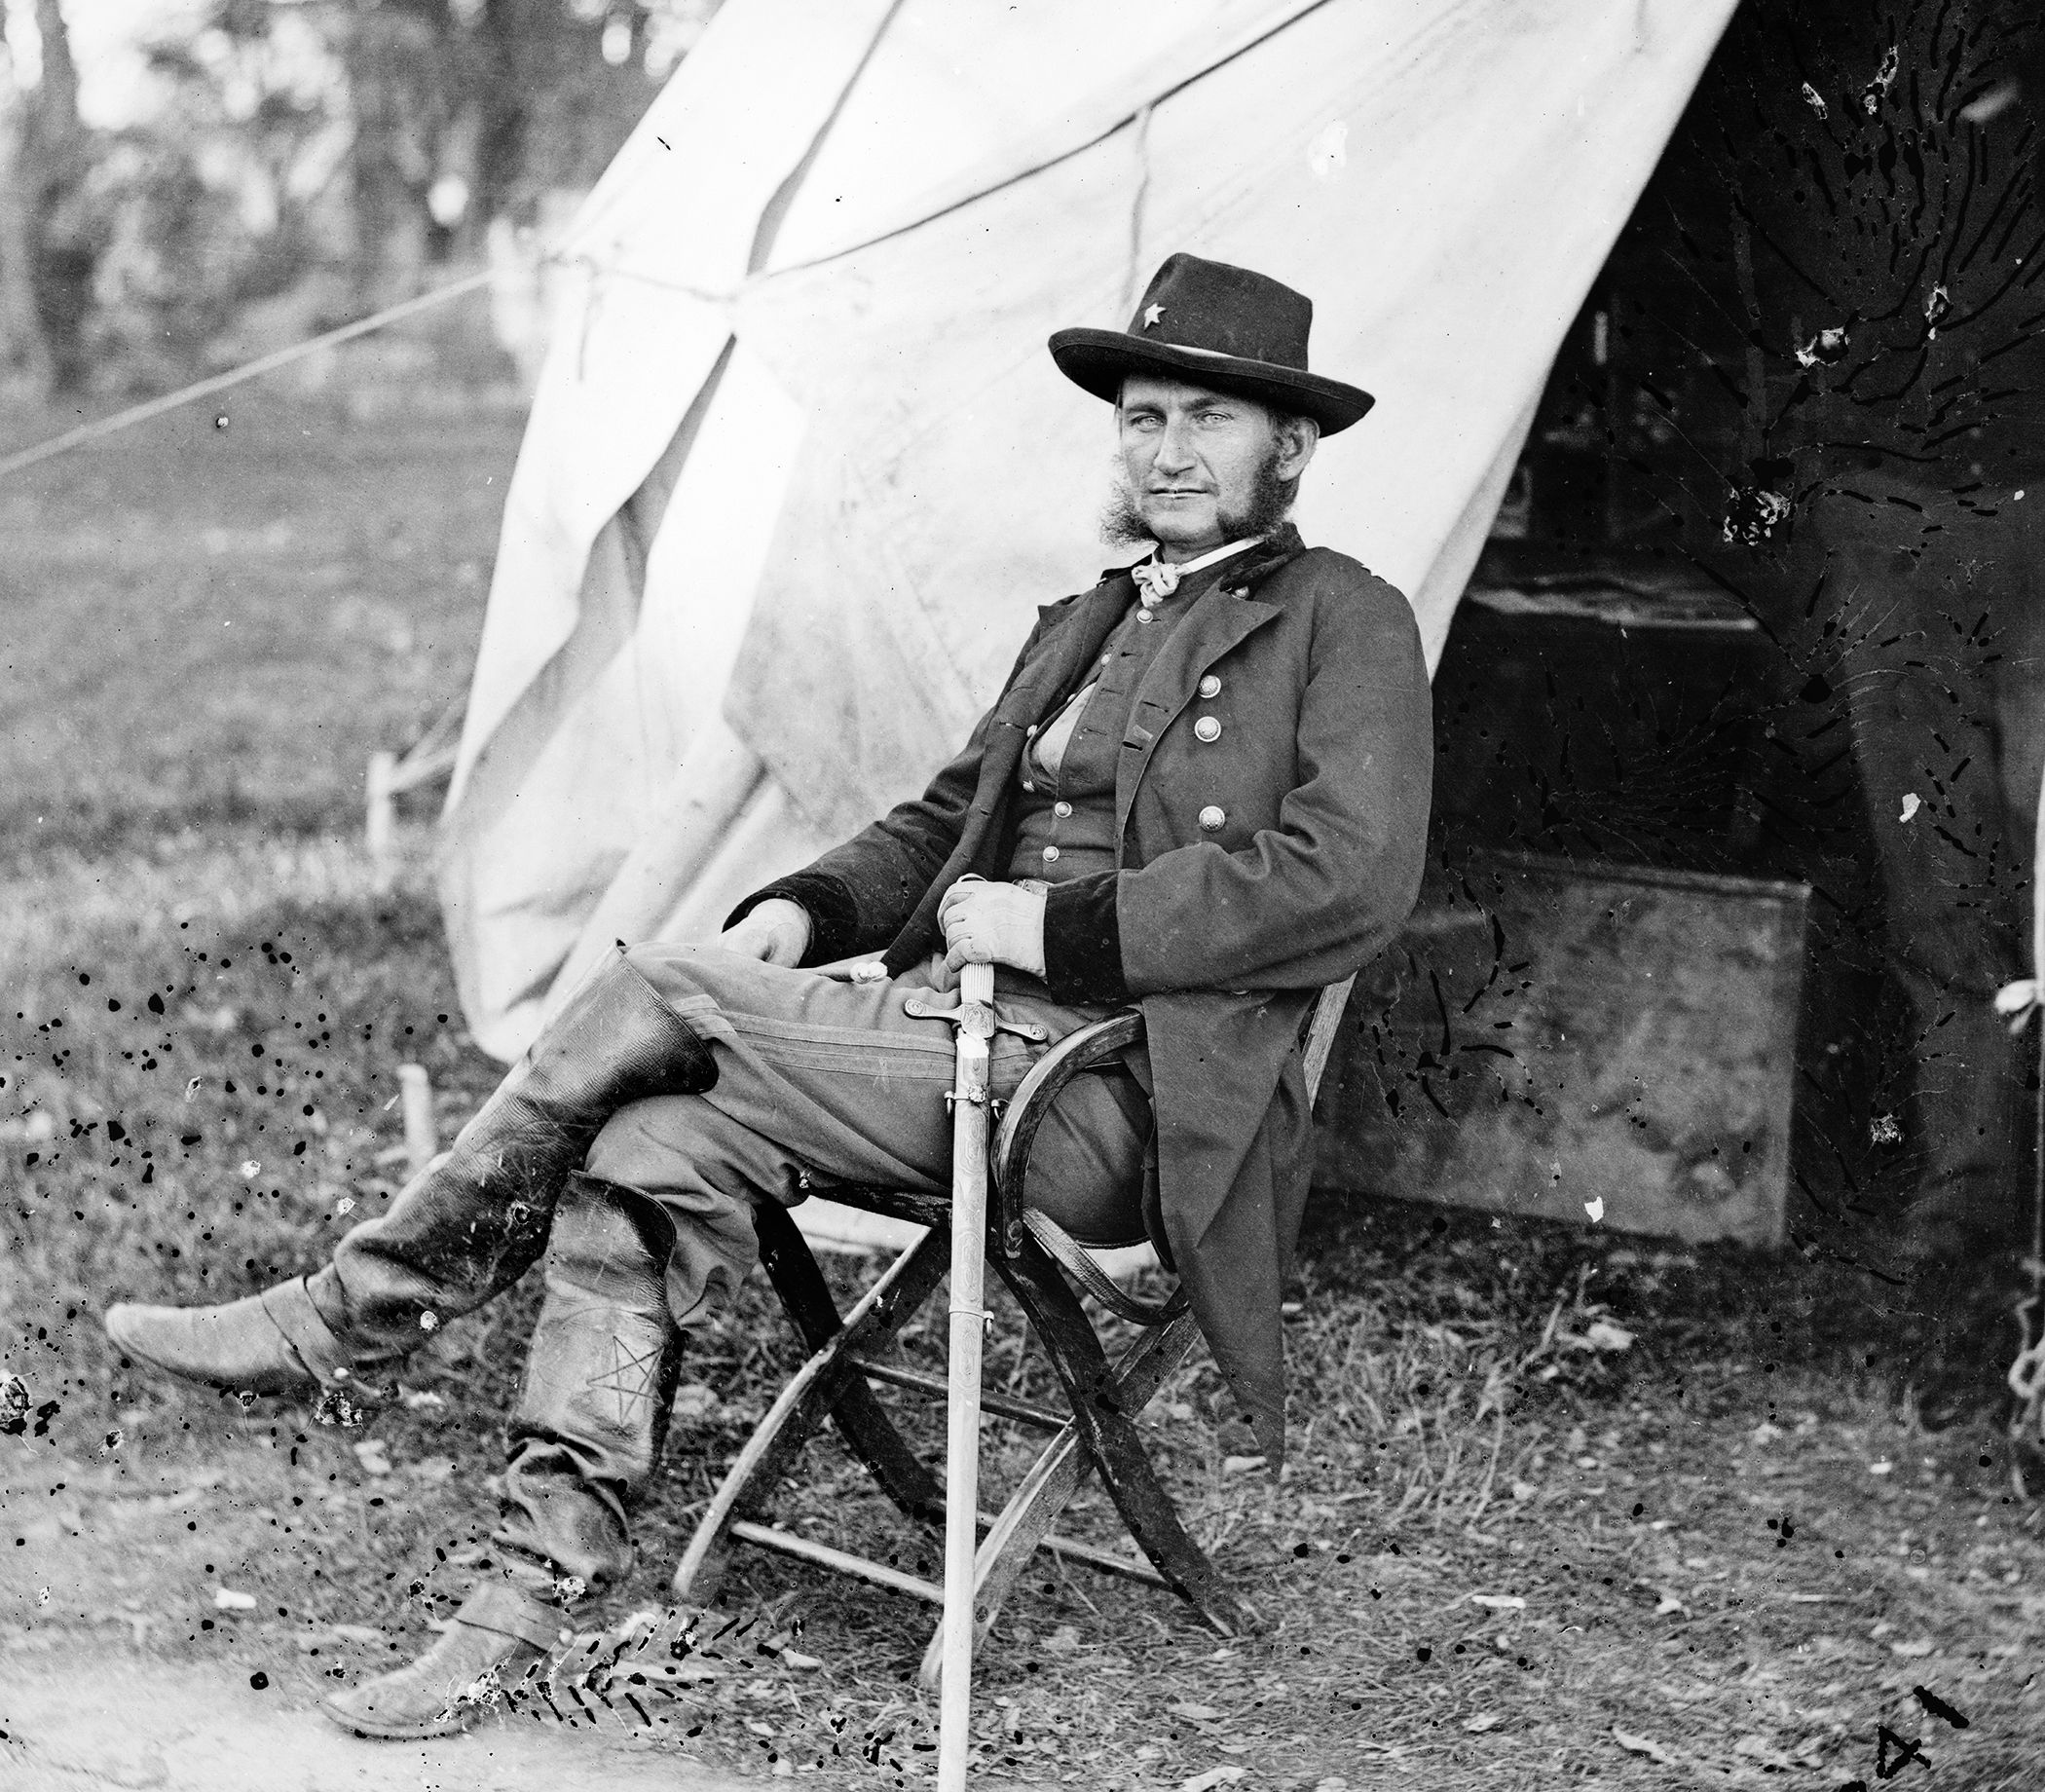 General Judson Kilpatrick, nicknamed “Kill-cavalry” due to his seeming reckless disregard for his own men during the war, rode in a rainstorm on July 4 to strike Confederate wagons rumored to be crossing Monterey Pass. Attacking at night, Kilpatrick captured 300 wagons and 1,000 prisoners, then rode south for Smithsburg, Maryland.